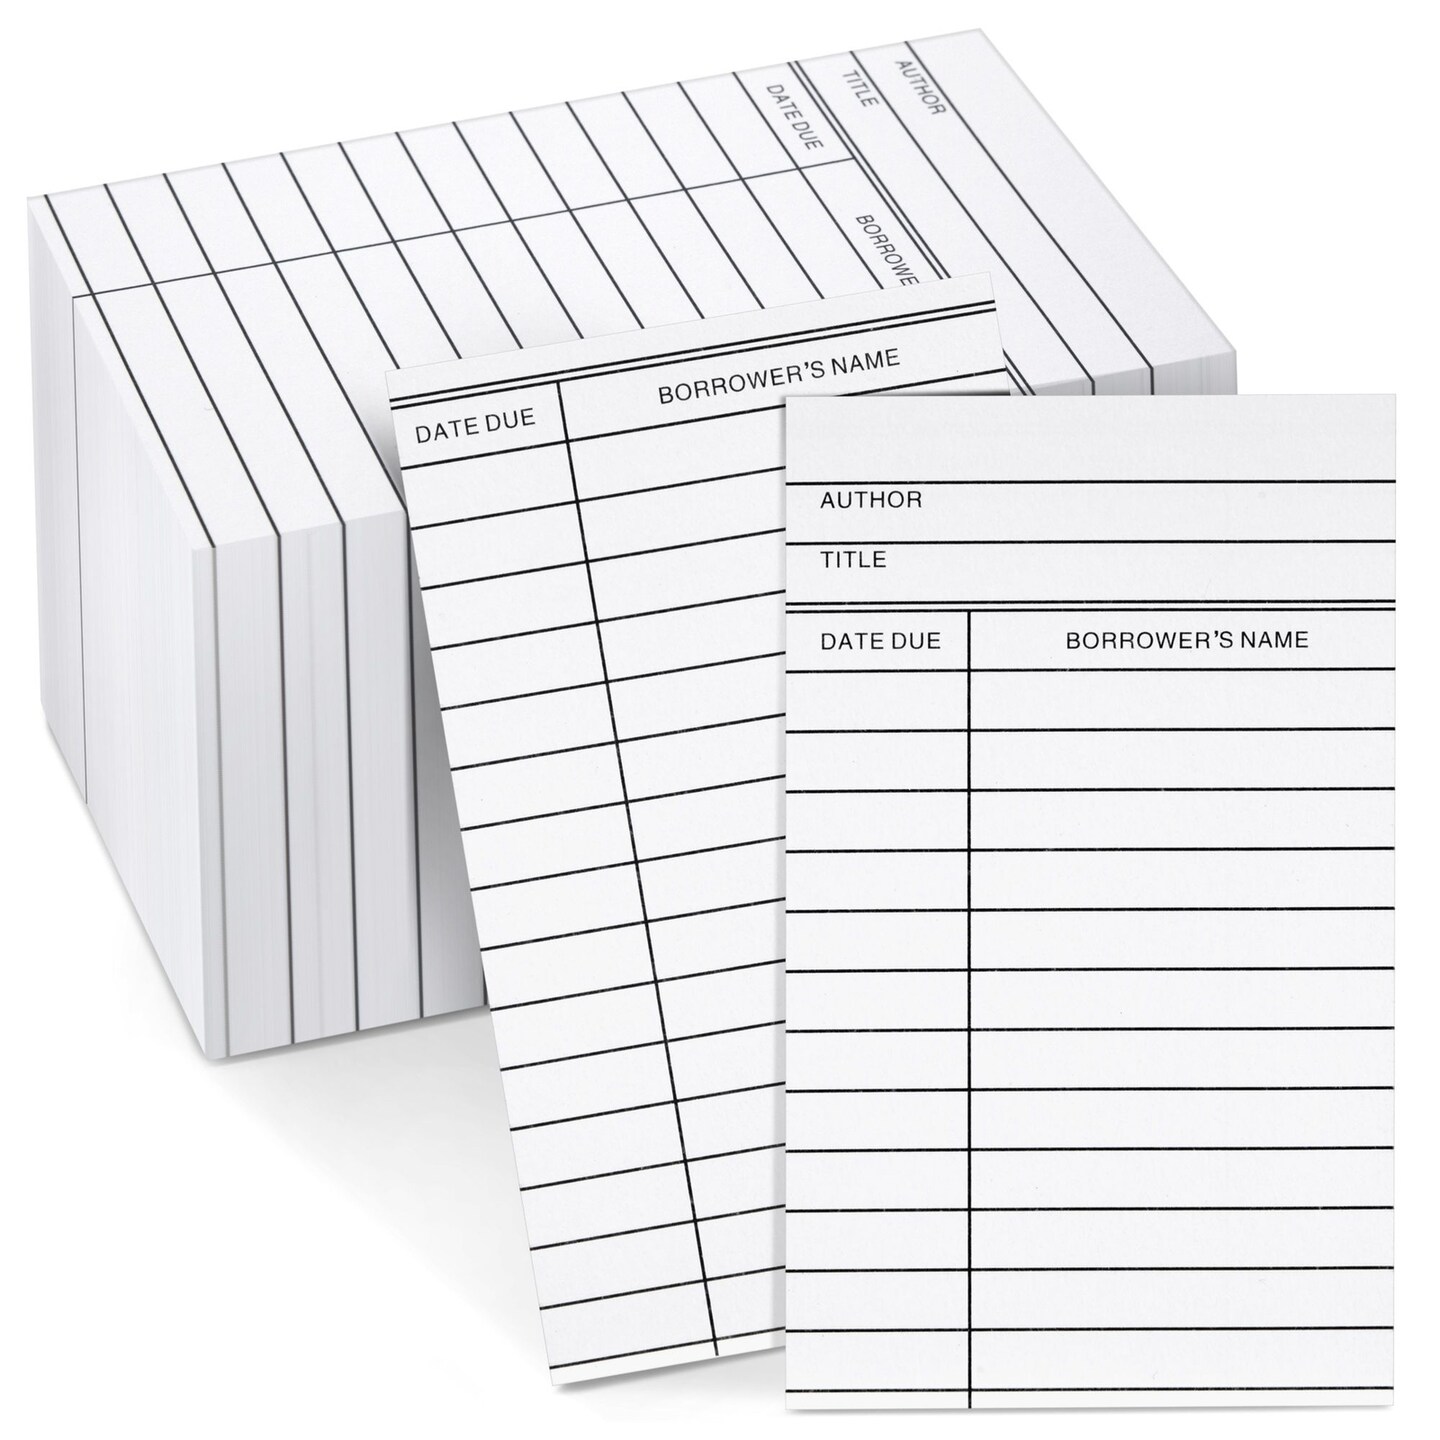 600 Pack Blank Library Cards for School Book Checkouts, Catalog CDs, DVDs, Vinyl Records, Classroom Supplies, Record Keeping, Tracking, Organizing, White (3x5 Inches)